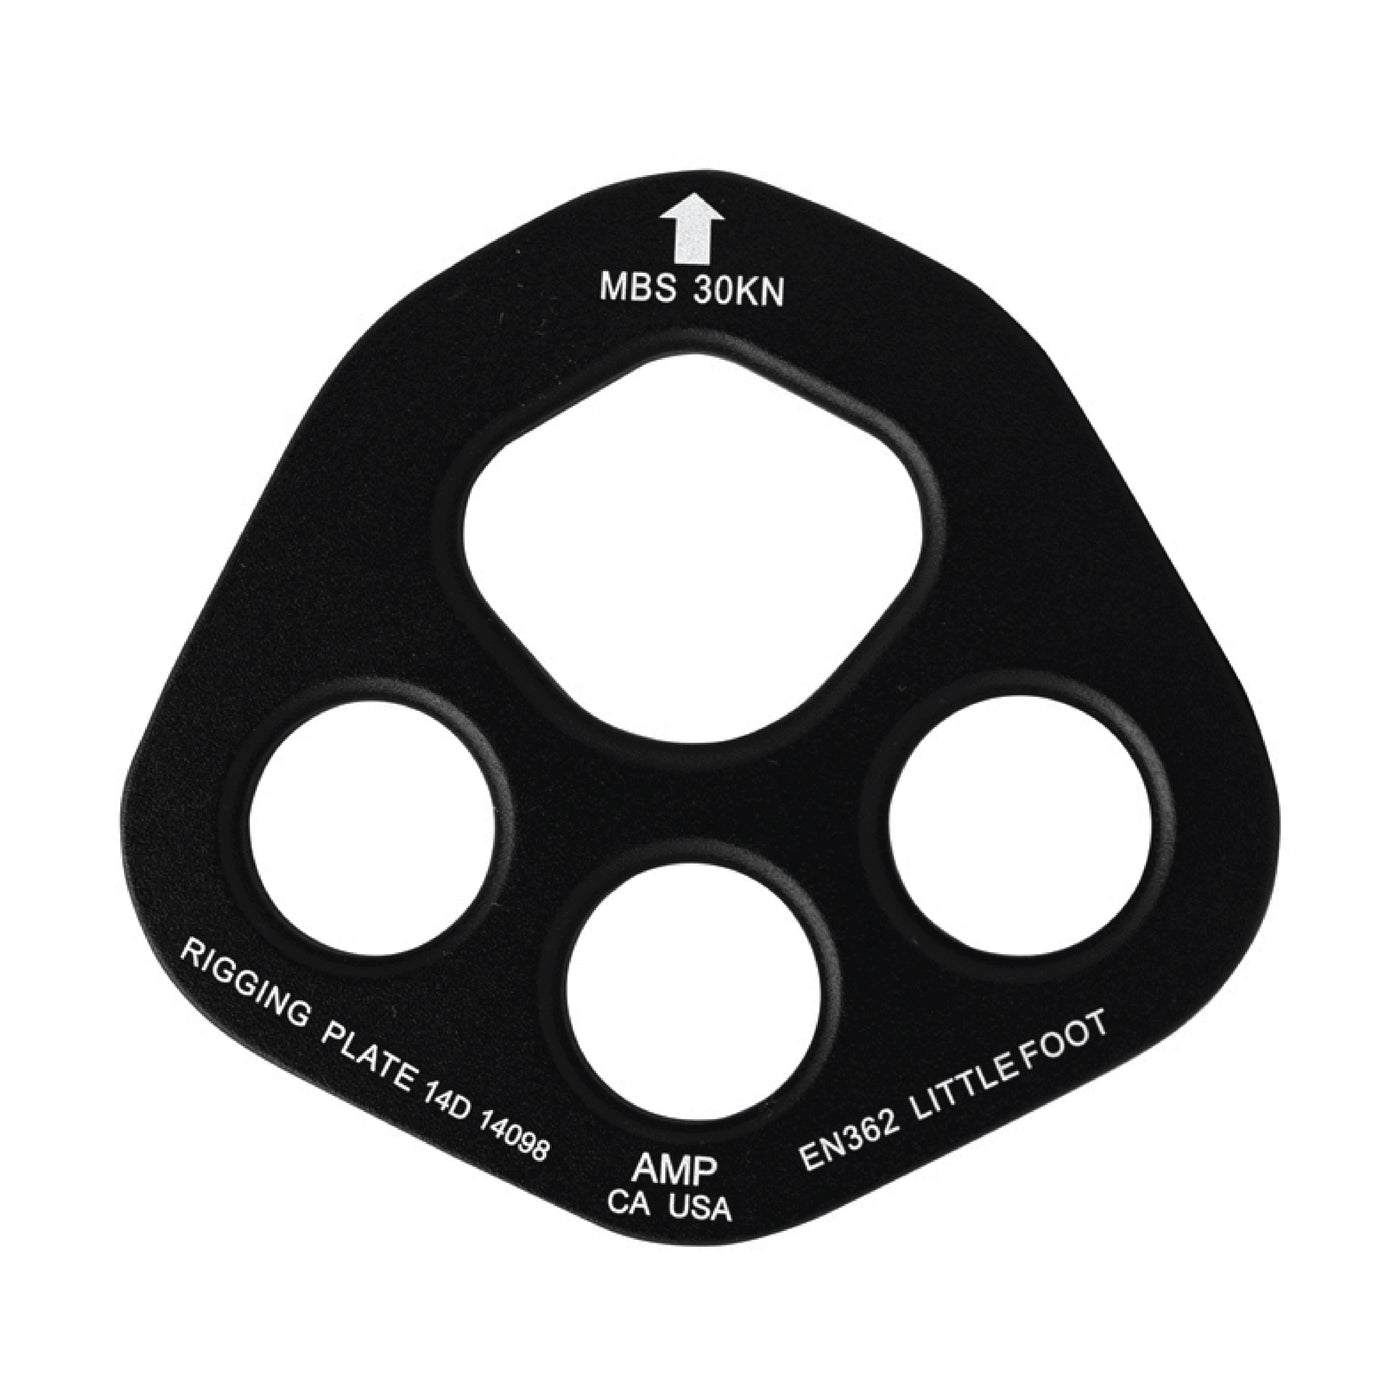 4 Hole Rigging Plate - Little Foot Aluminum BLK/ORG for Multiple Attachment 